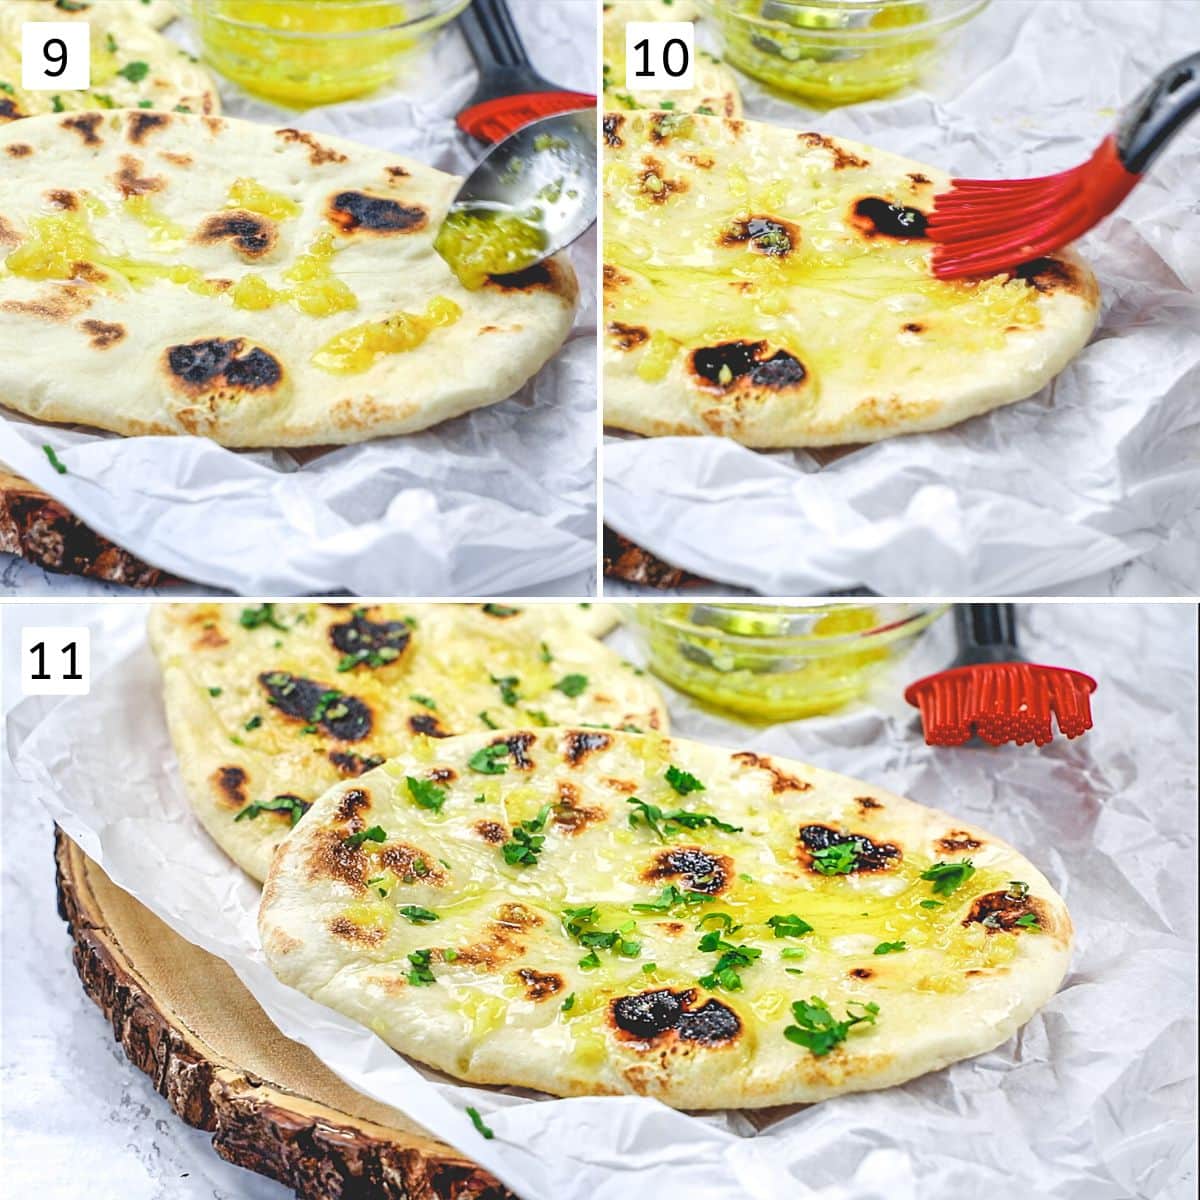 Collage of 3 images showing brushing with garlic ghee and sprinkling cilantro.